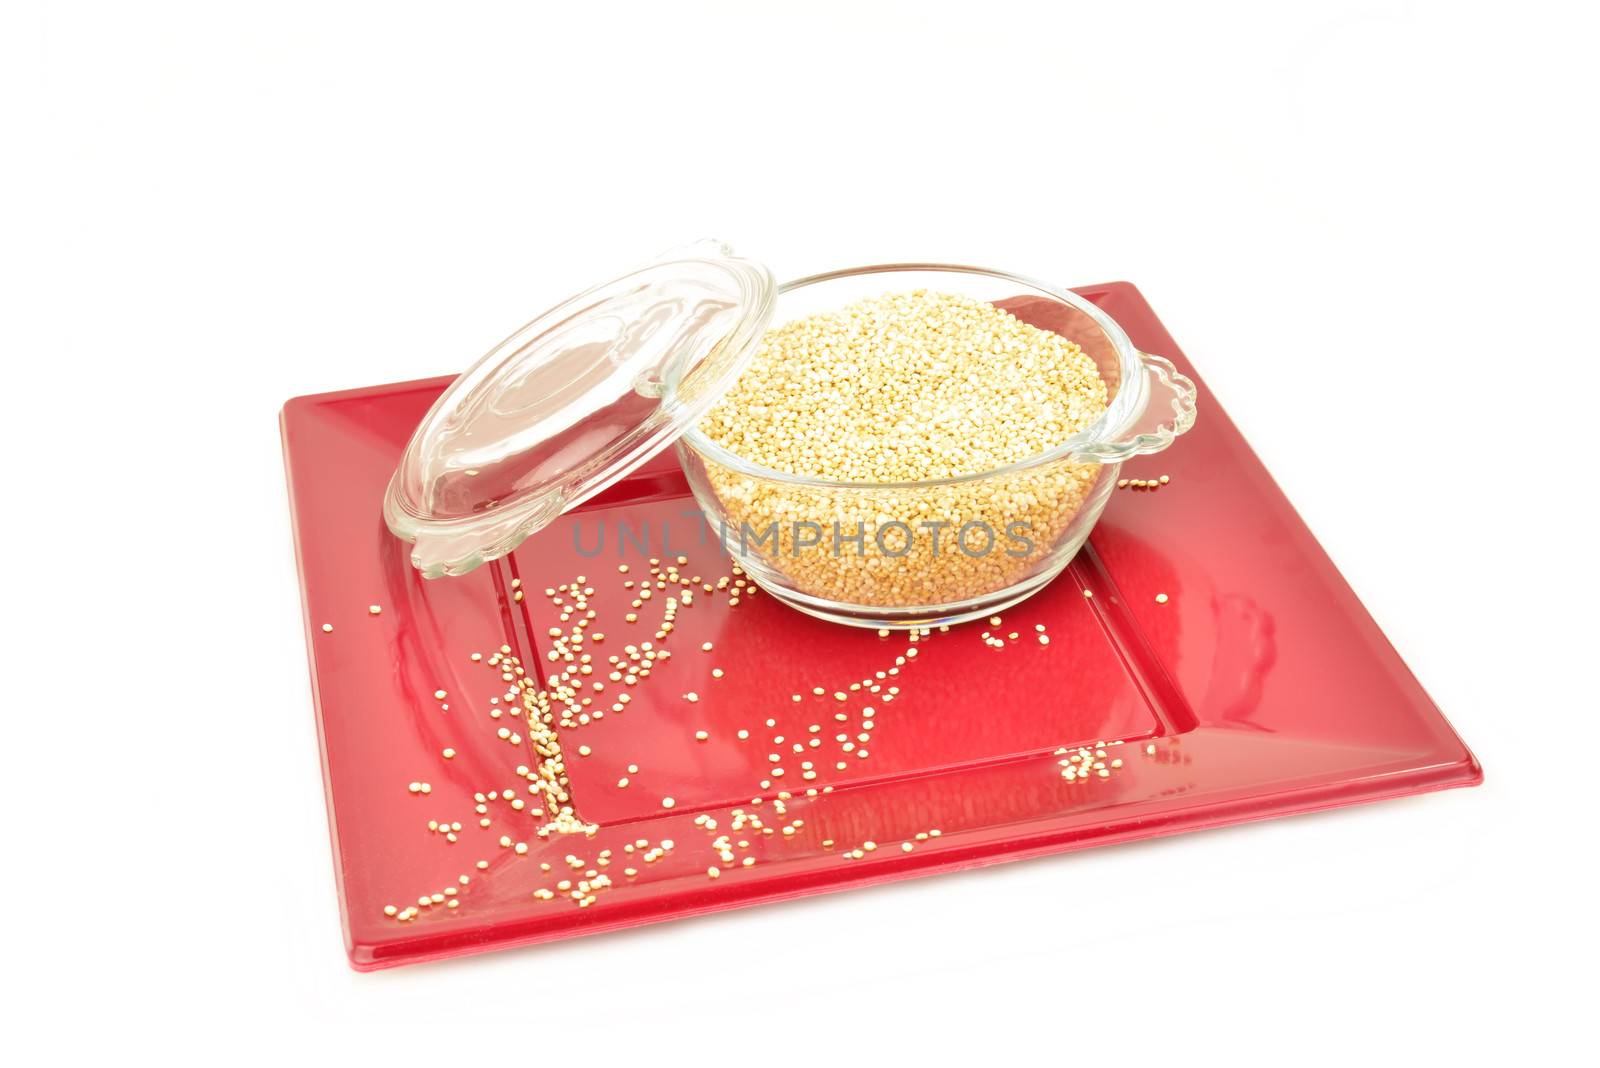 quinoa in glass bowl on a red plate isolated on white background